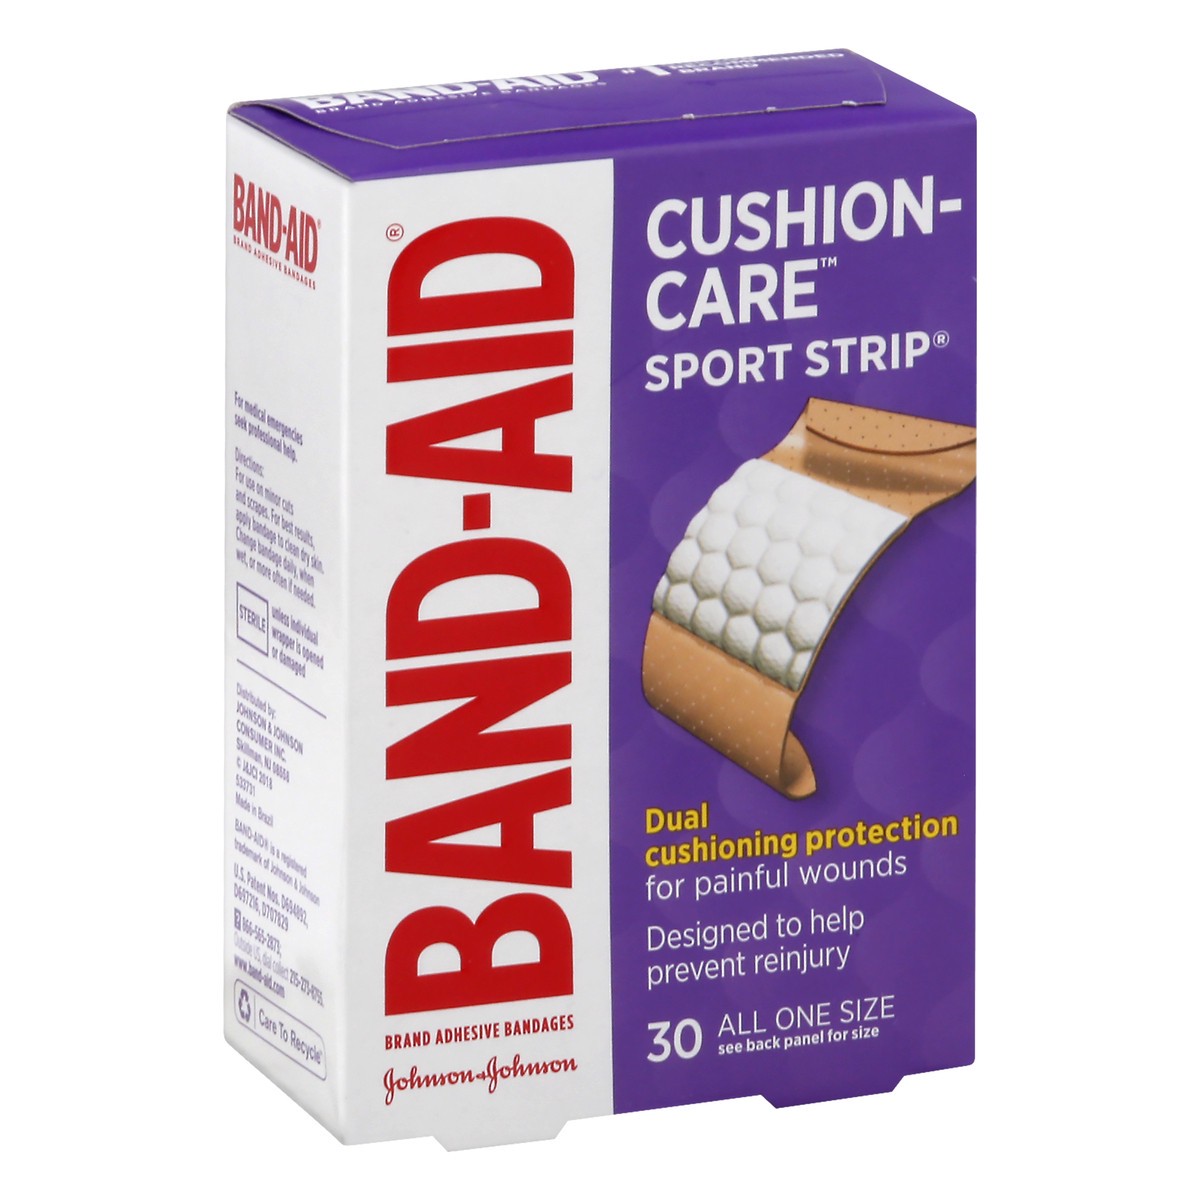 slide 2 of 9, BAND-AID Sterile Cushion Care Flexible Sport Strip Water Resistant Adhesive Bandages, Active First Aid & Wound Care for Minor Cuts, Scrapes & Burns, Extra-Wide Comfort Pad, 30 ct, 30 ct